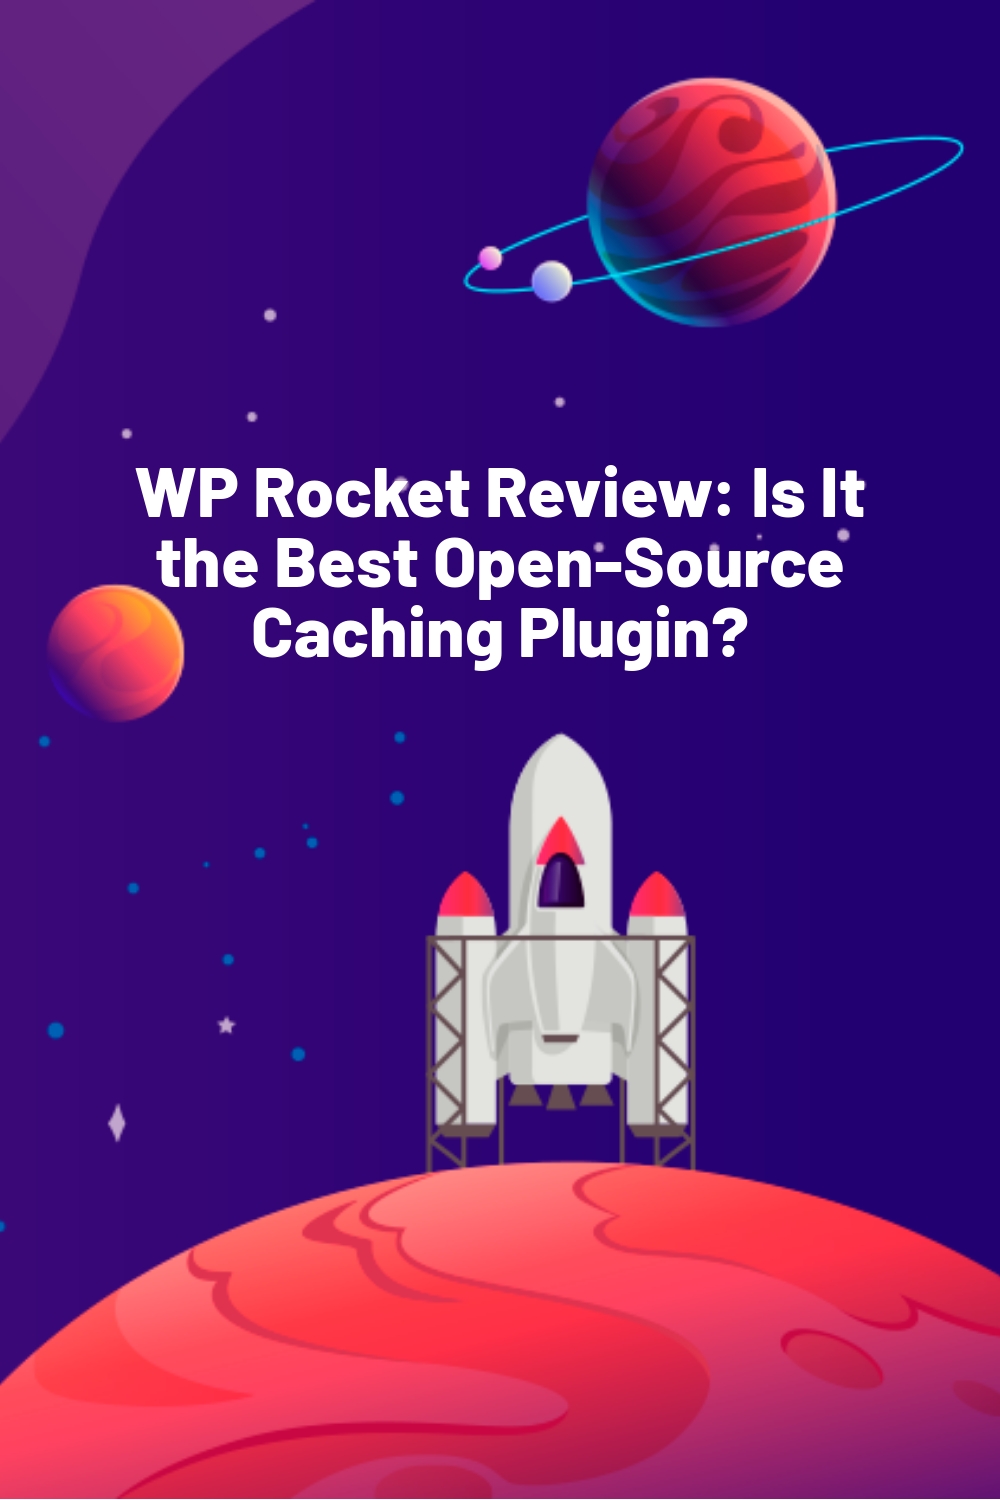 WP Rocket Review: Is It the Best Open-Source Caching Plugin?